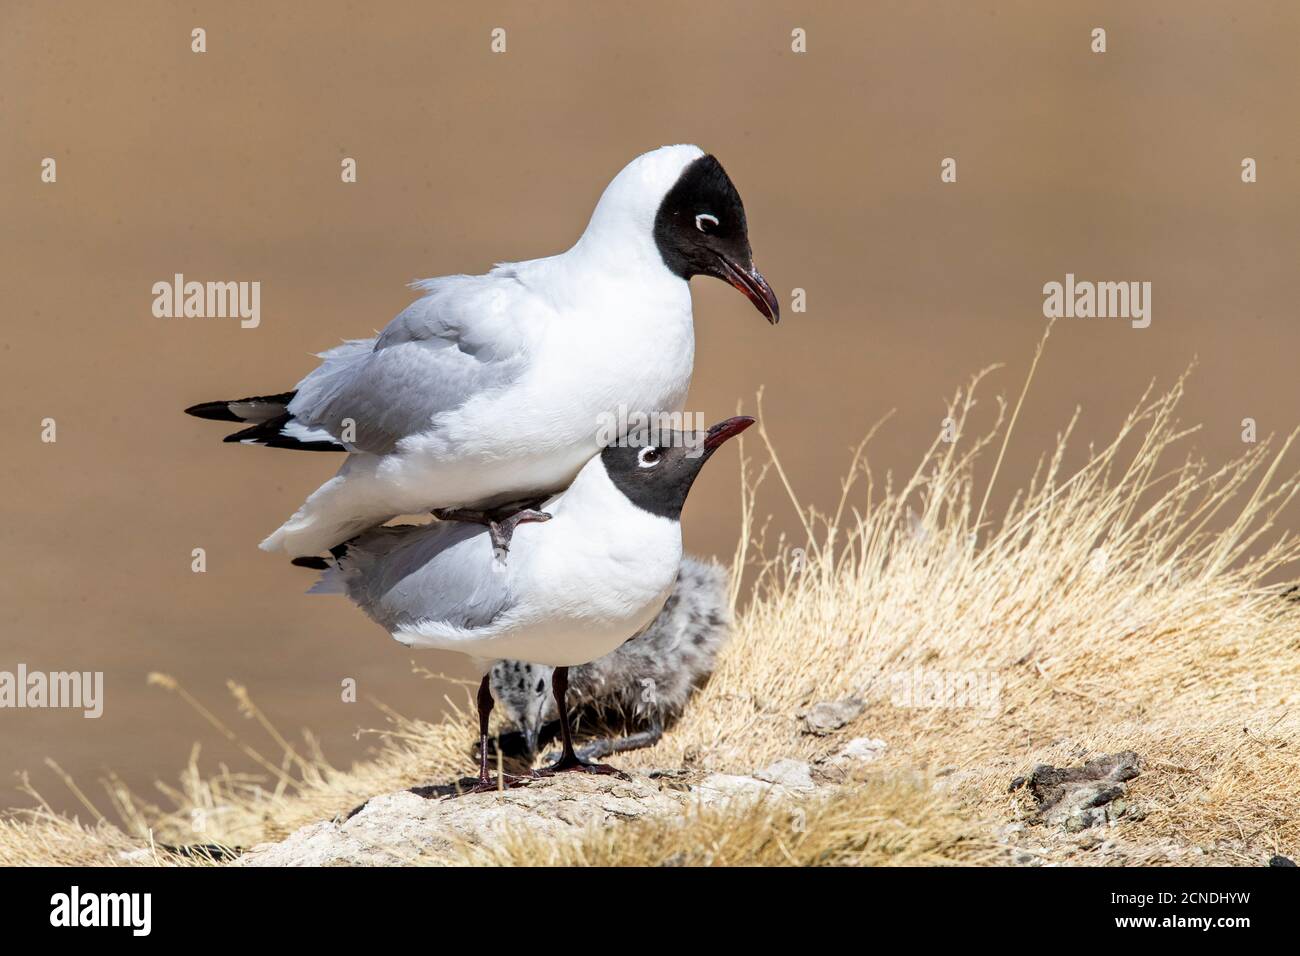 A pair of Andean gulls (Chroicocephalus serranus), mating in a lagoon, Andean Central Volcanic Zone, Chile Stock Photo